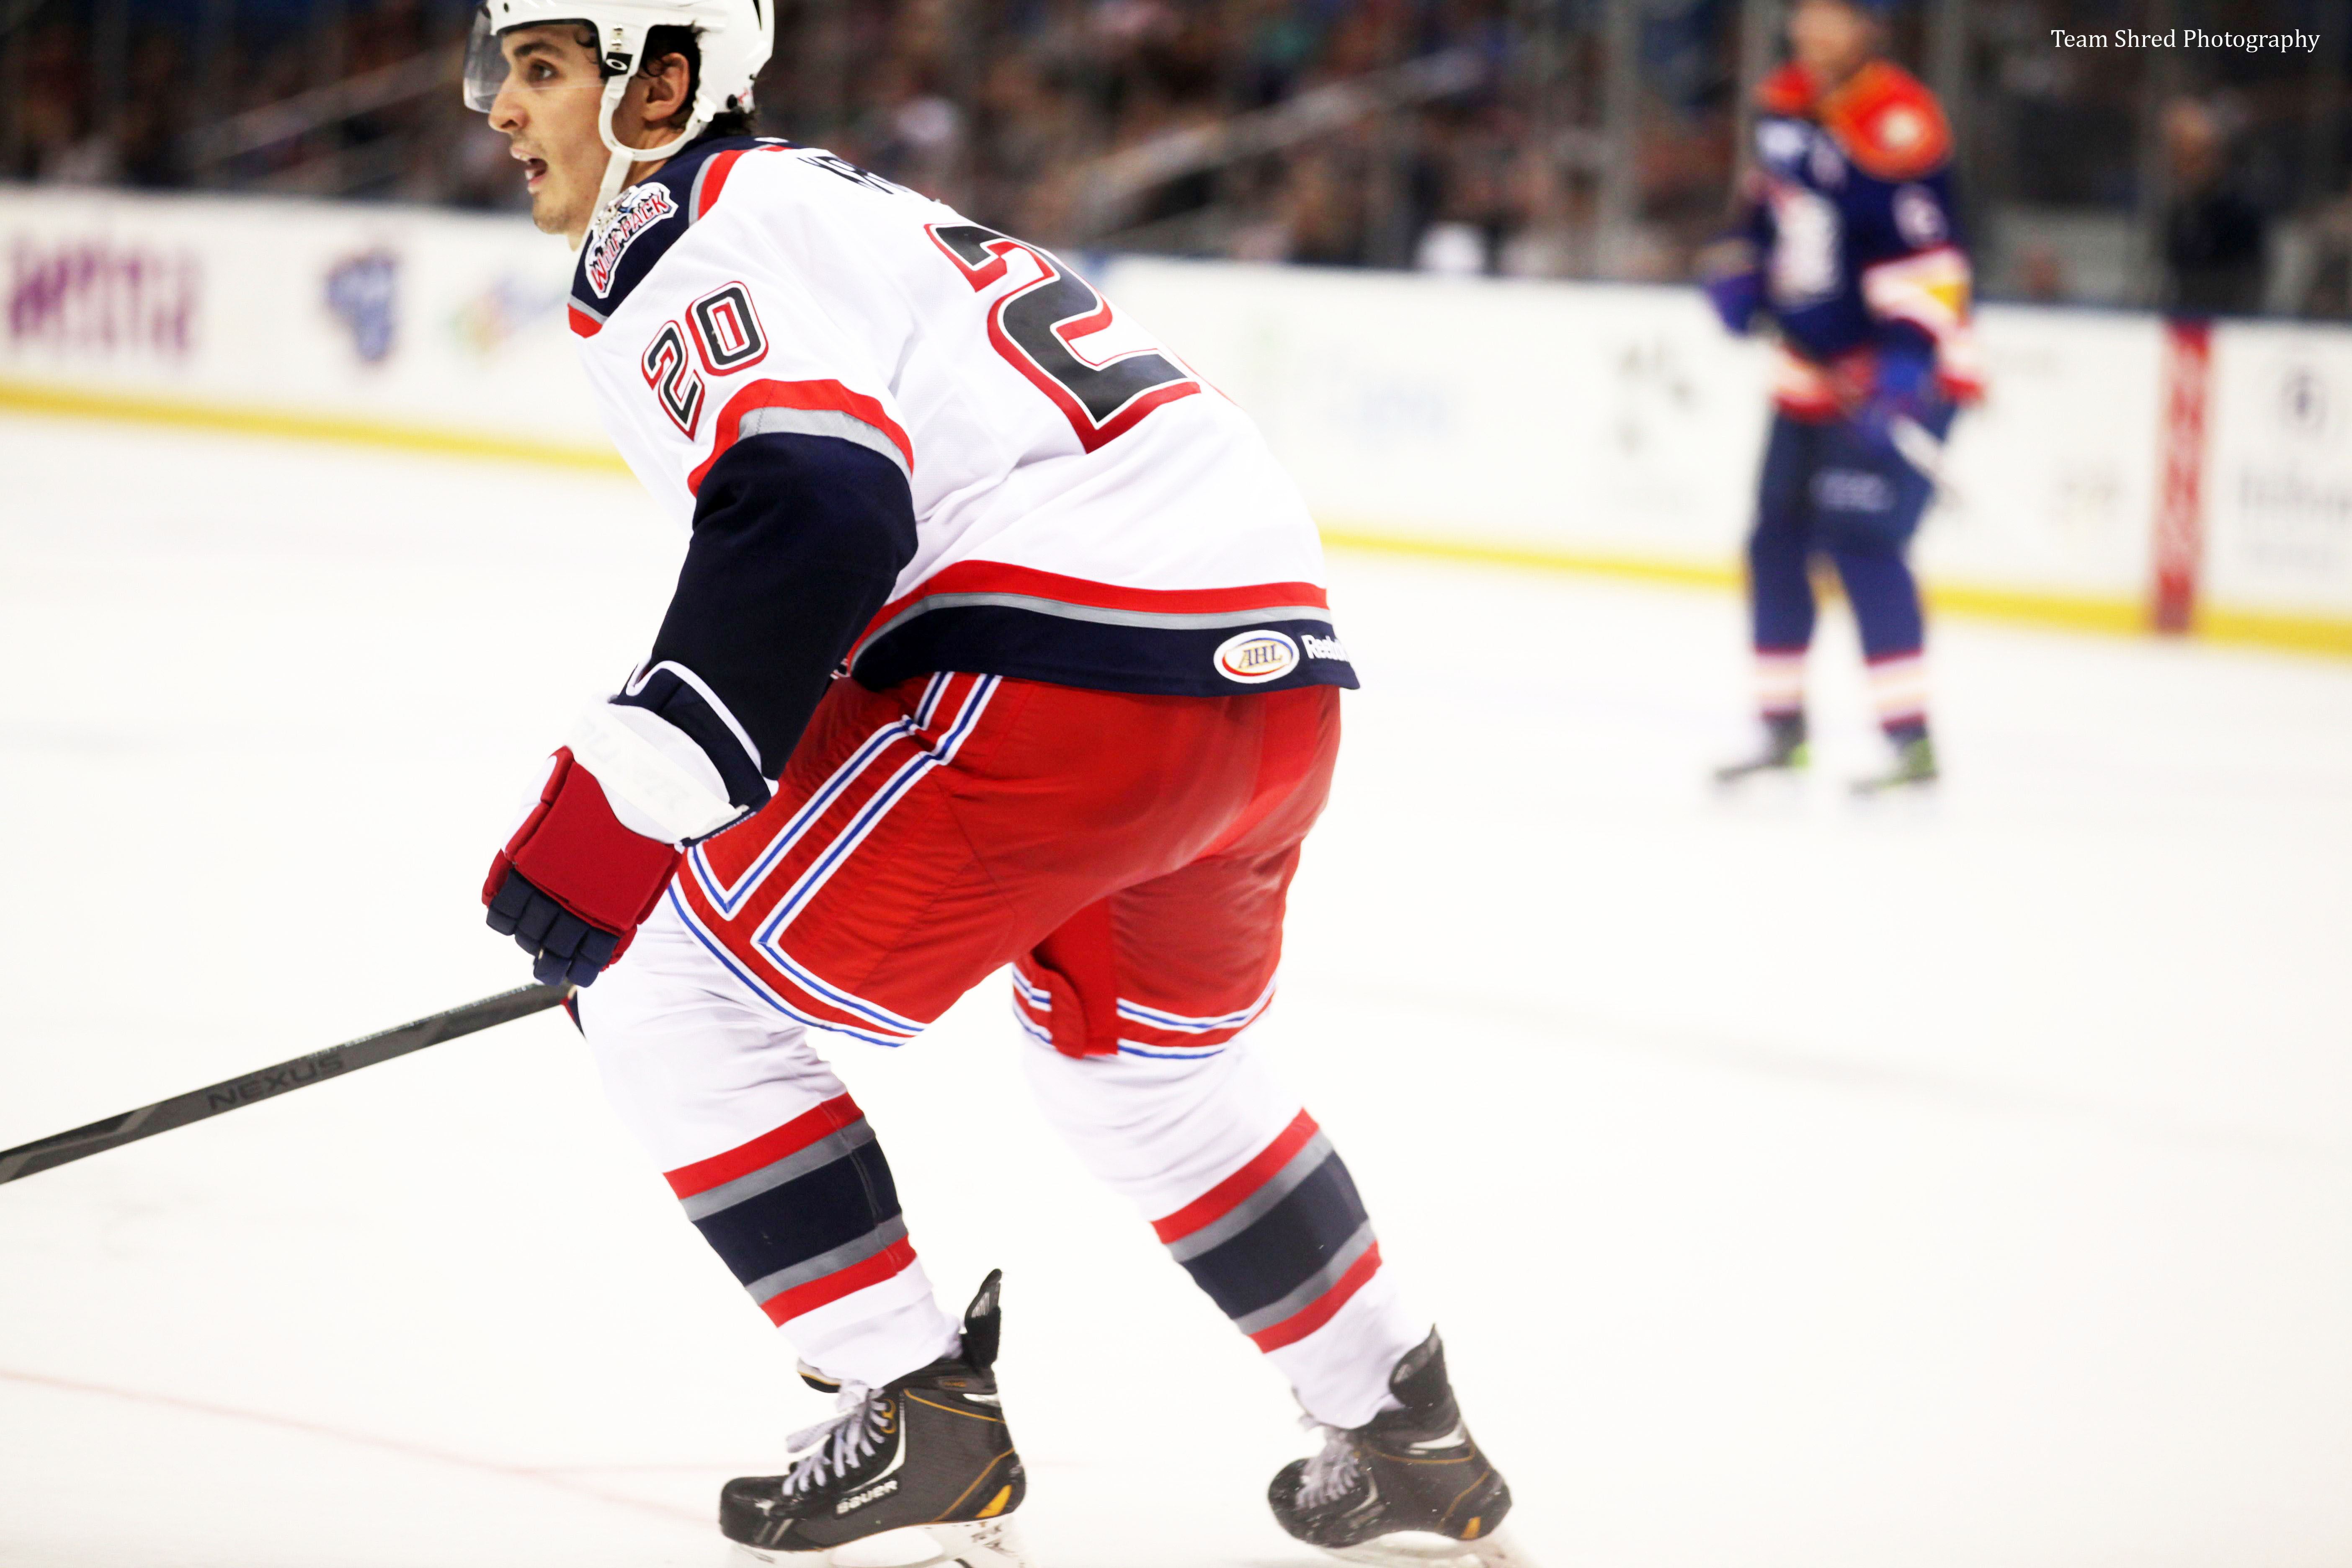 Lockout Has Rangers' Kreider Playing in Connecticut - The New York